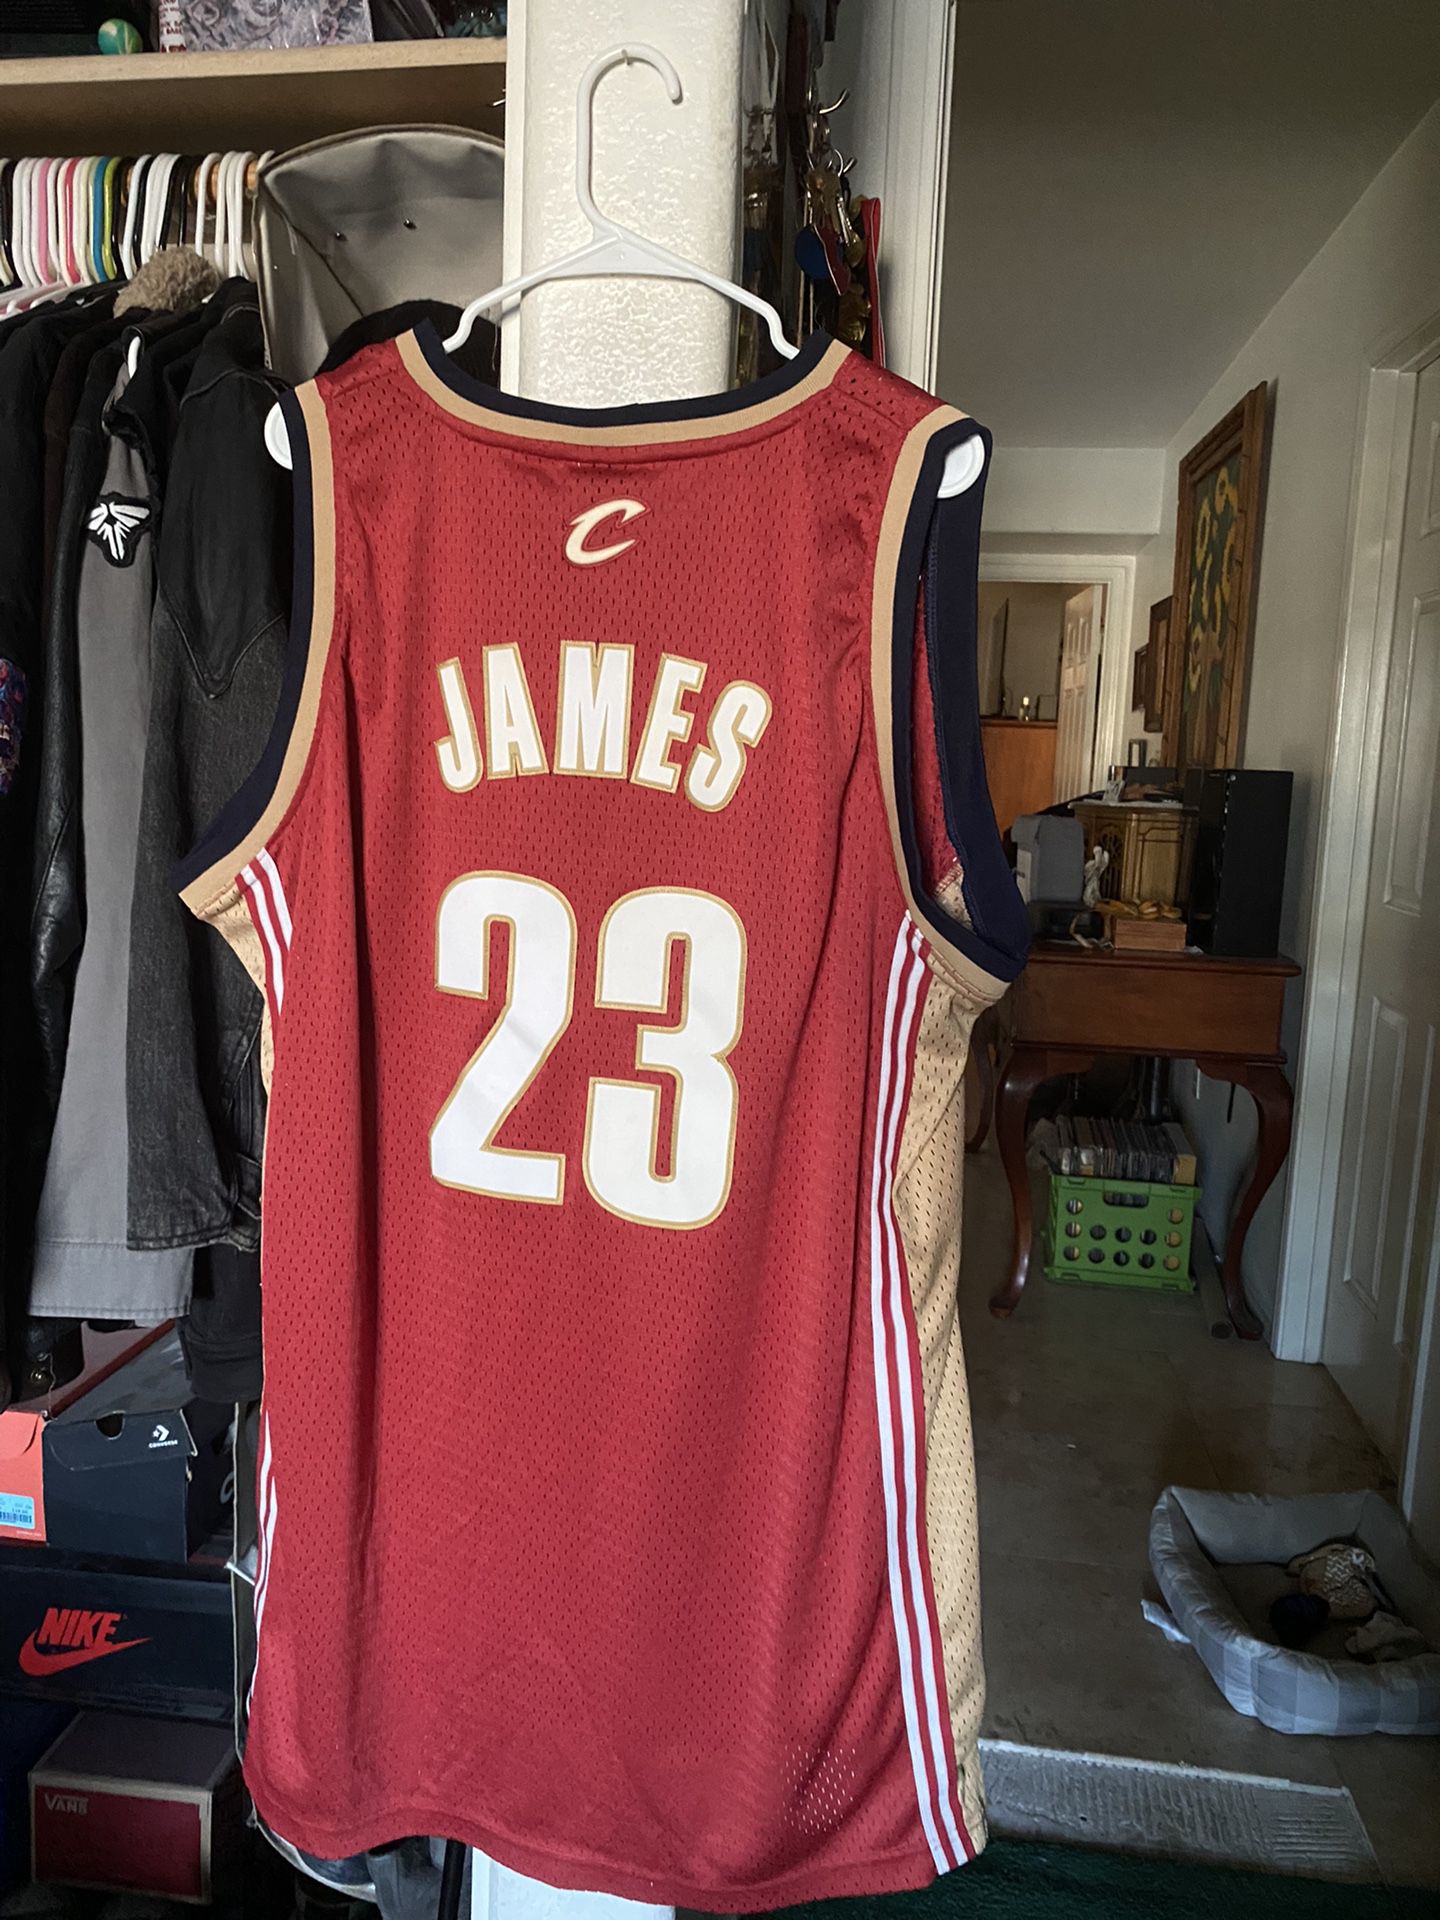 XL LeBron James Jersey And Shorts for Sale in Rancho Cordova, CA - OfferUp